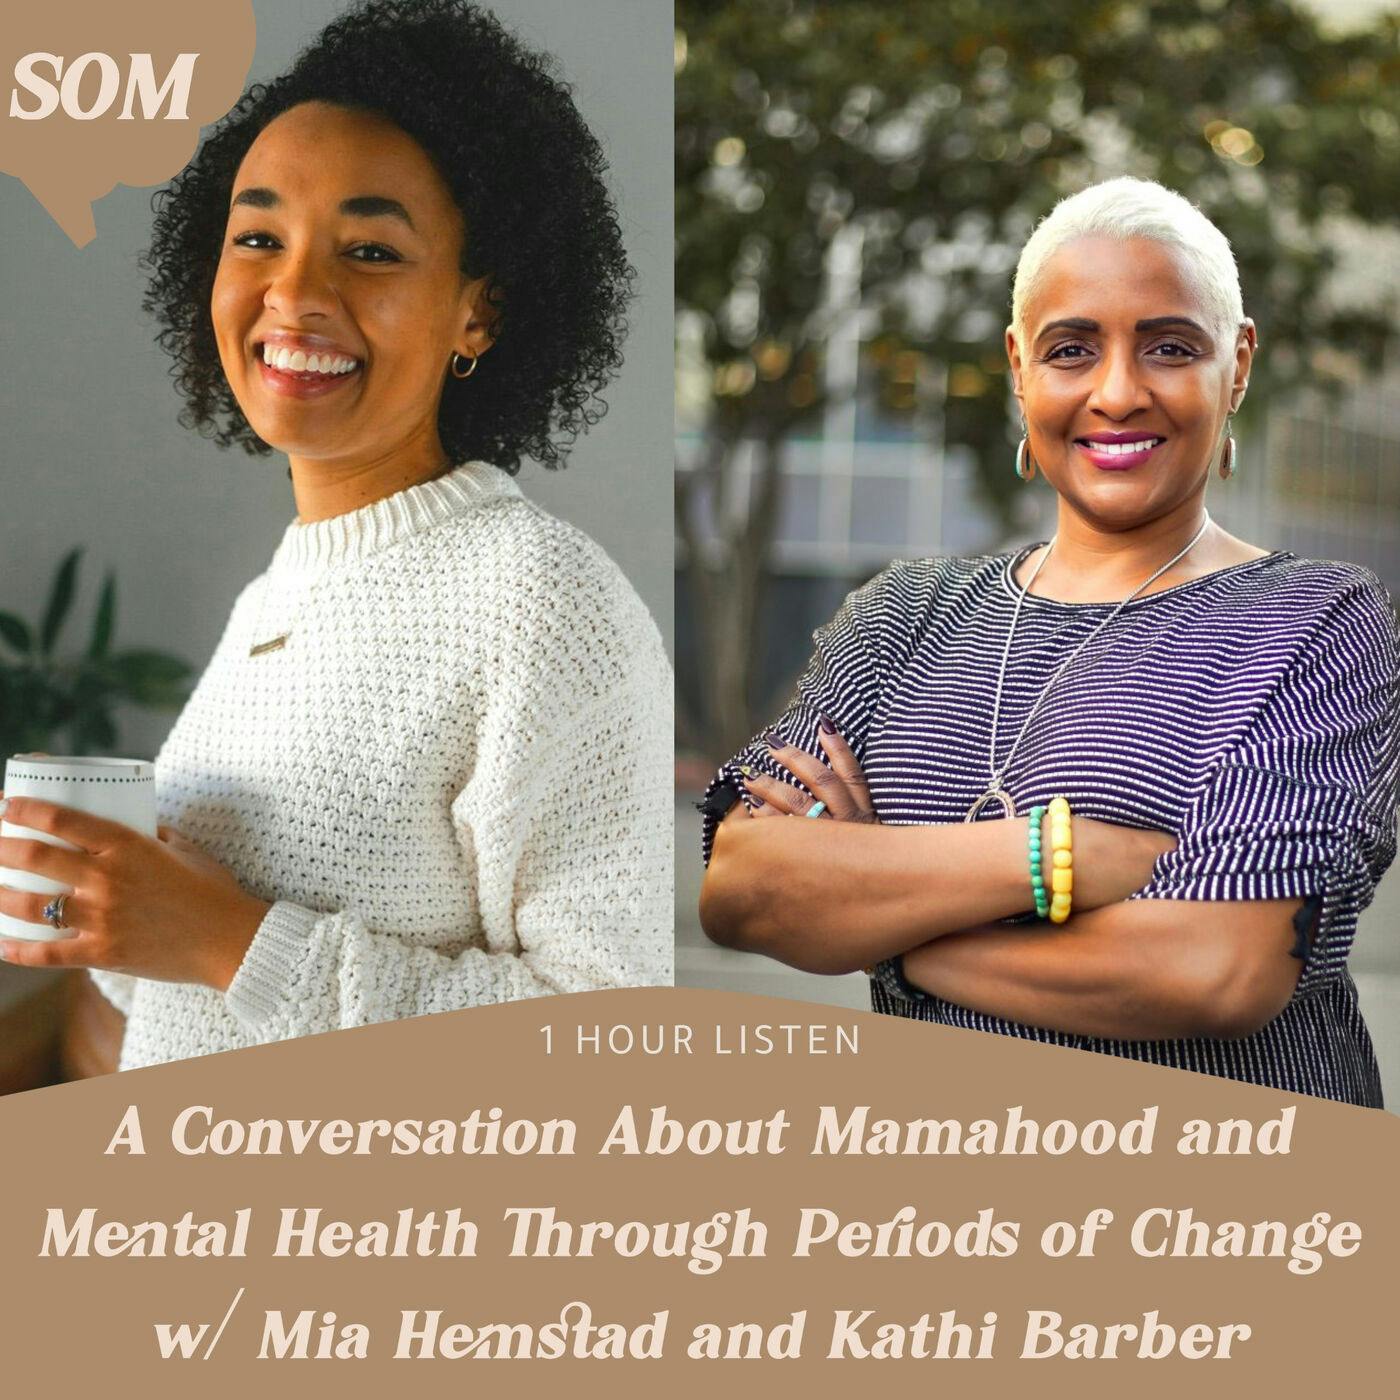 A Conversation About Mamahood and Mental Health Through Periods of Change w/ Mia Hemstad and Kathi Barber